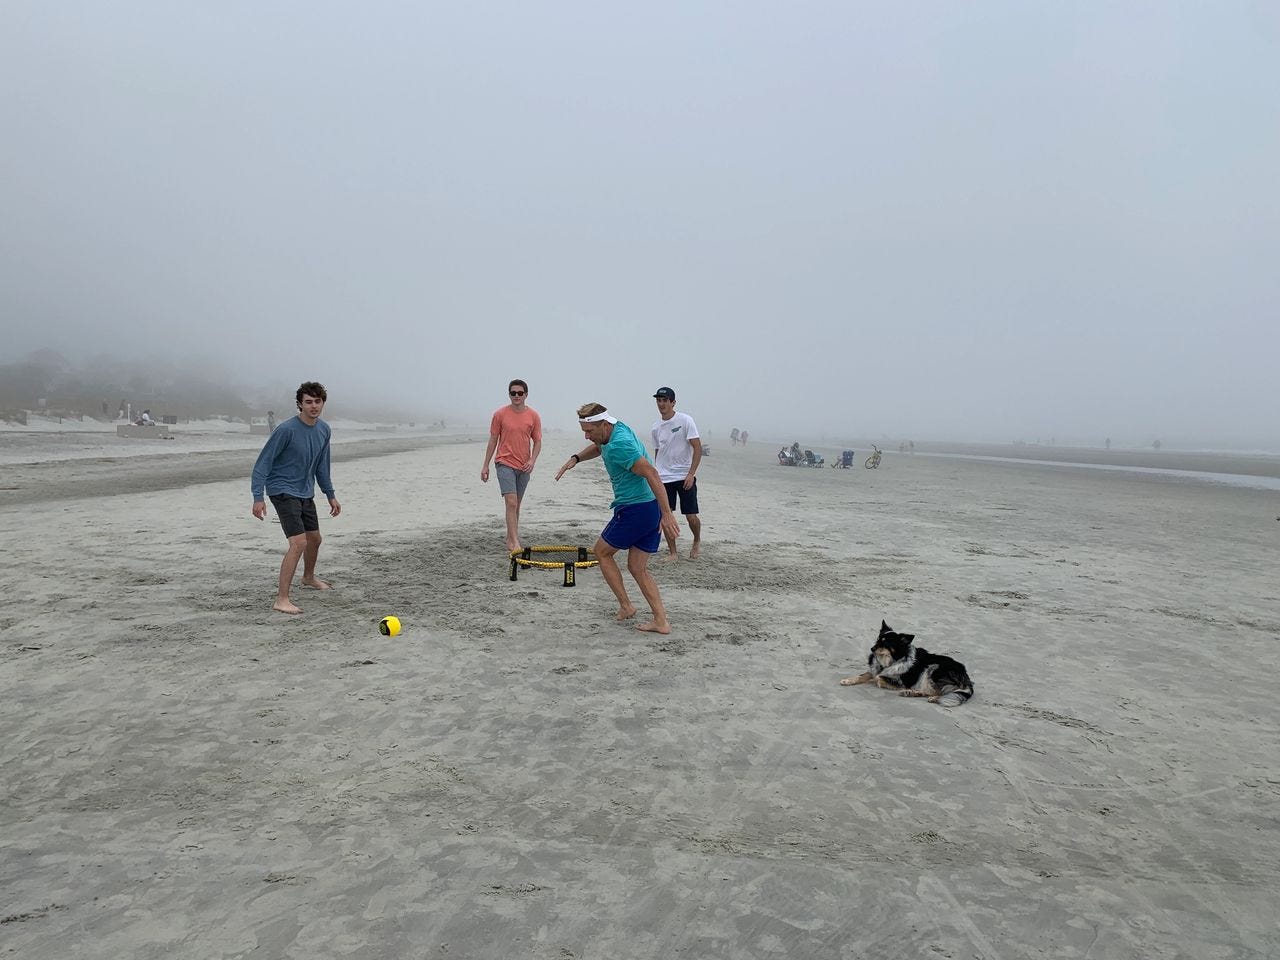 A warm, misty day on Hilton Head Island in January with our sons and nephew -- and dog, Annie.